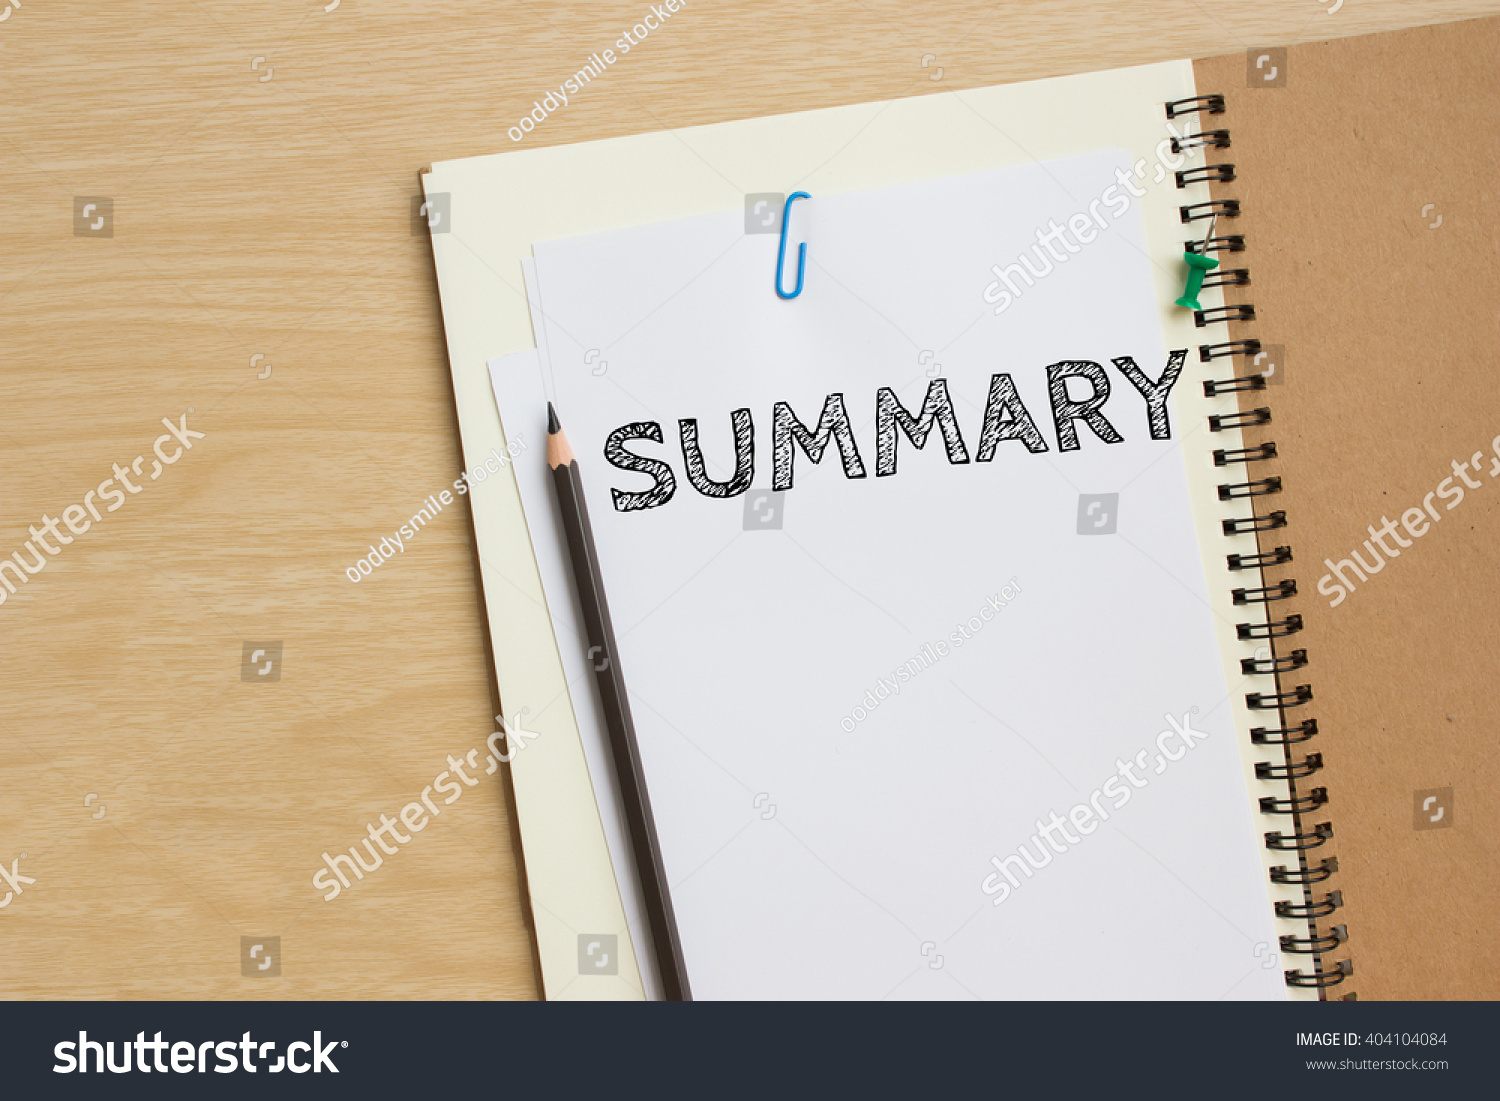 Text Summary on white paper and pencil on the desk / top view / business concept #404104084